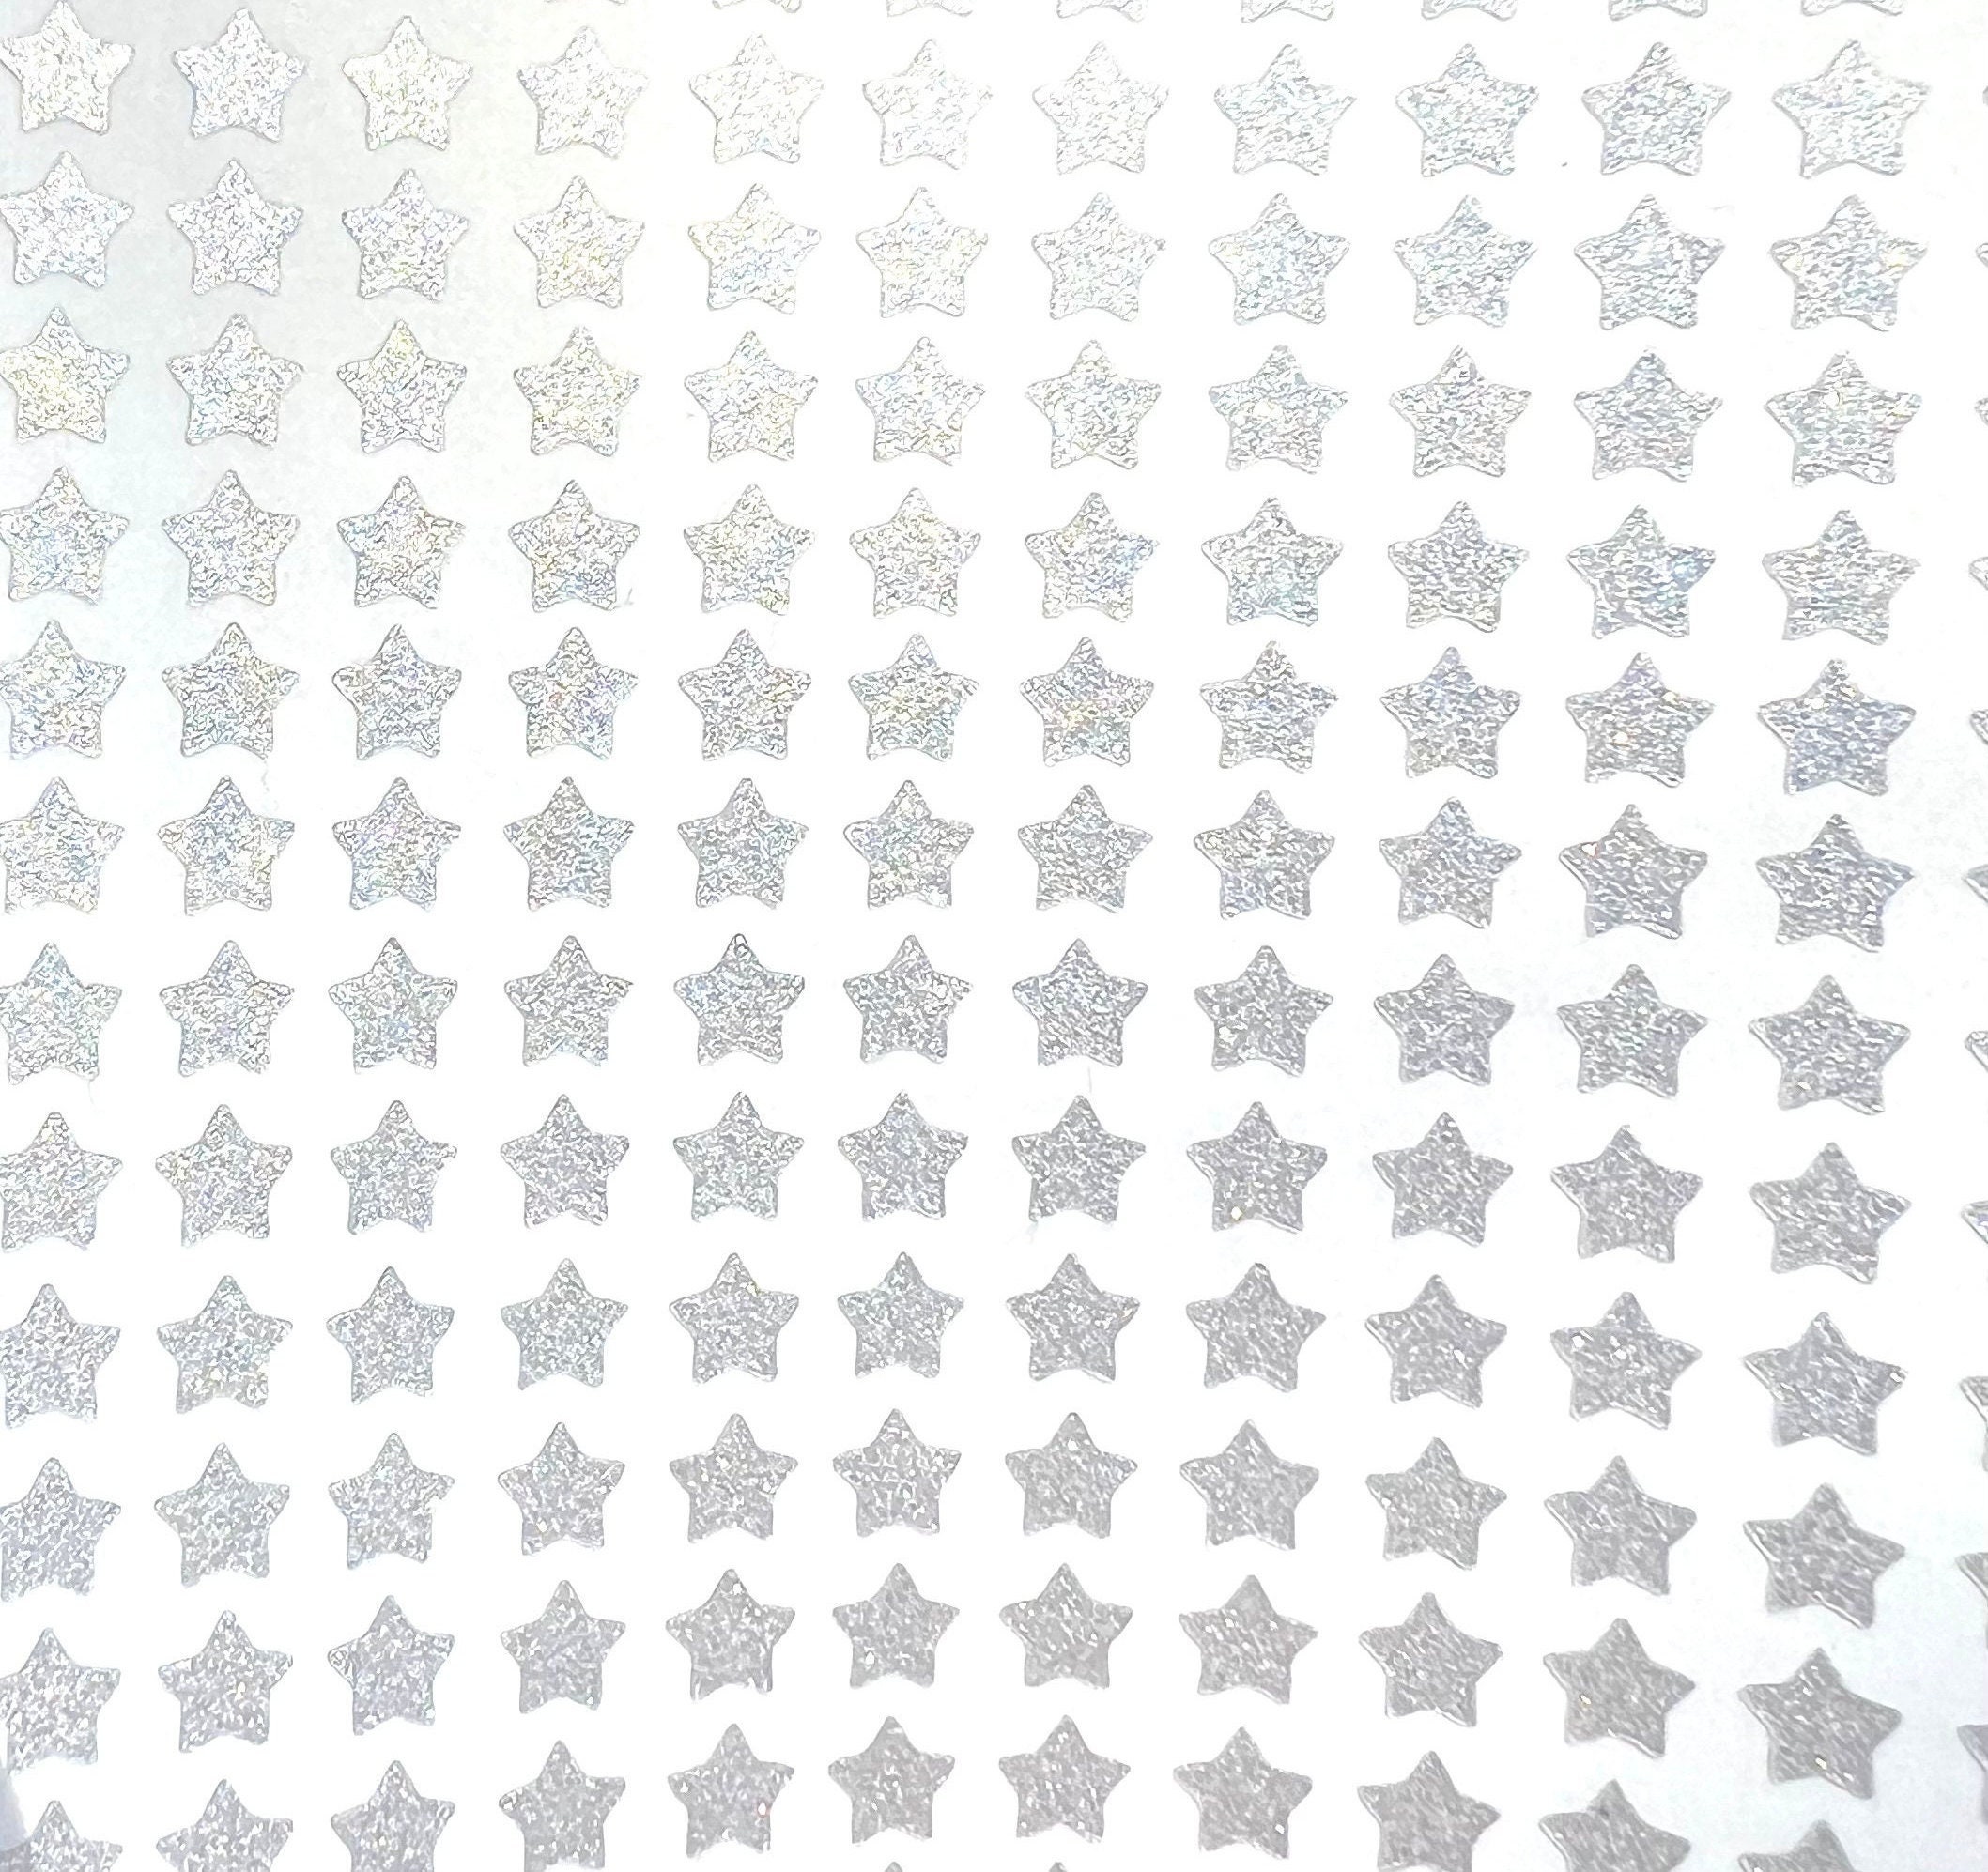 SPARKLY SILVER STAR Stickers, Mrs. Grossman's 2 Full Sticker Strips  Christmas Stars Fun Accent Stickers 